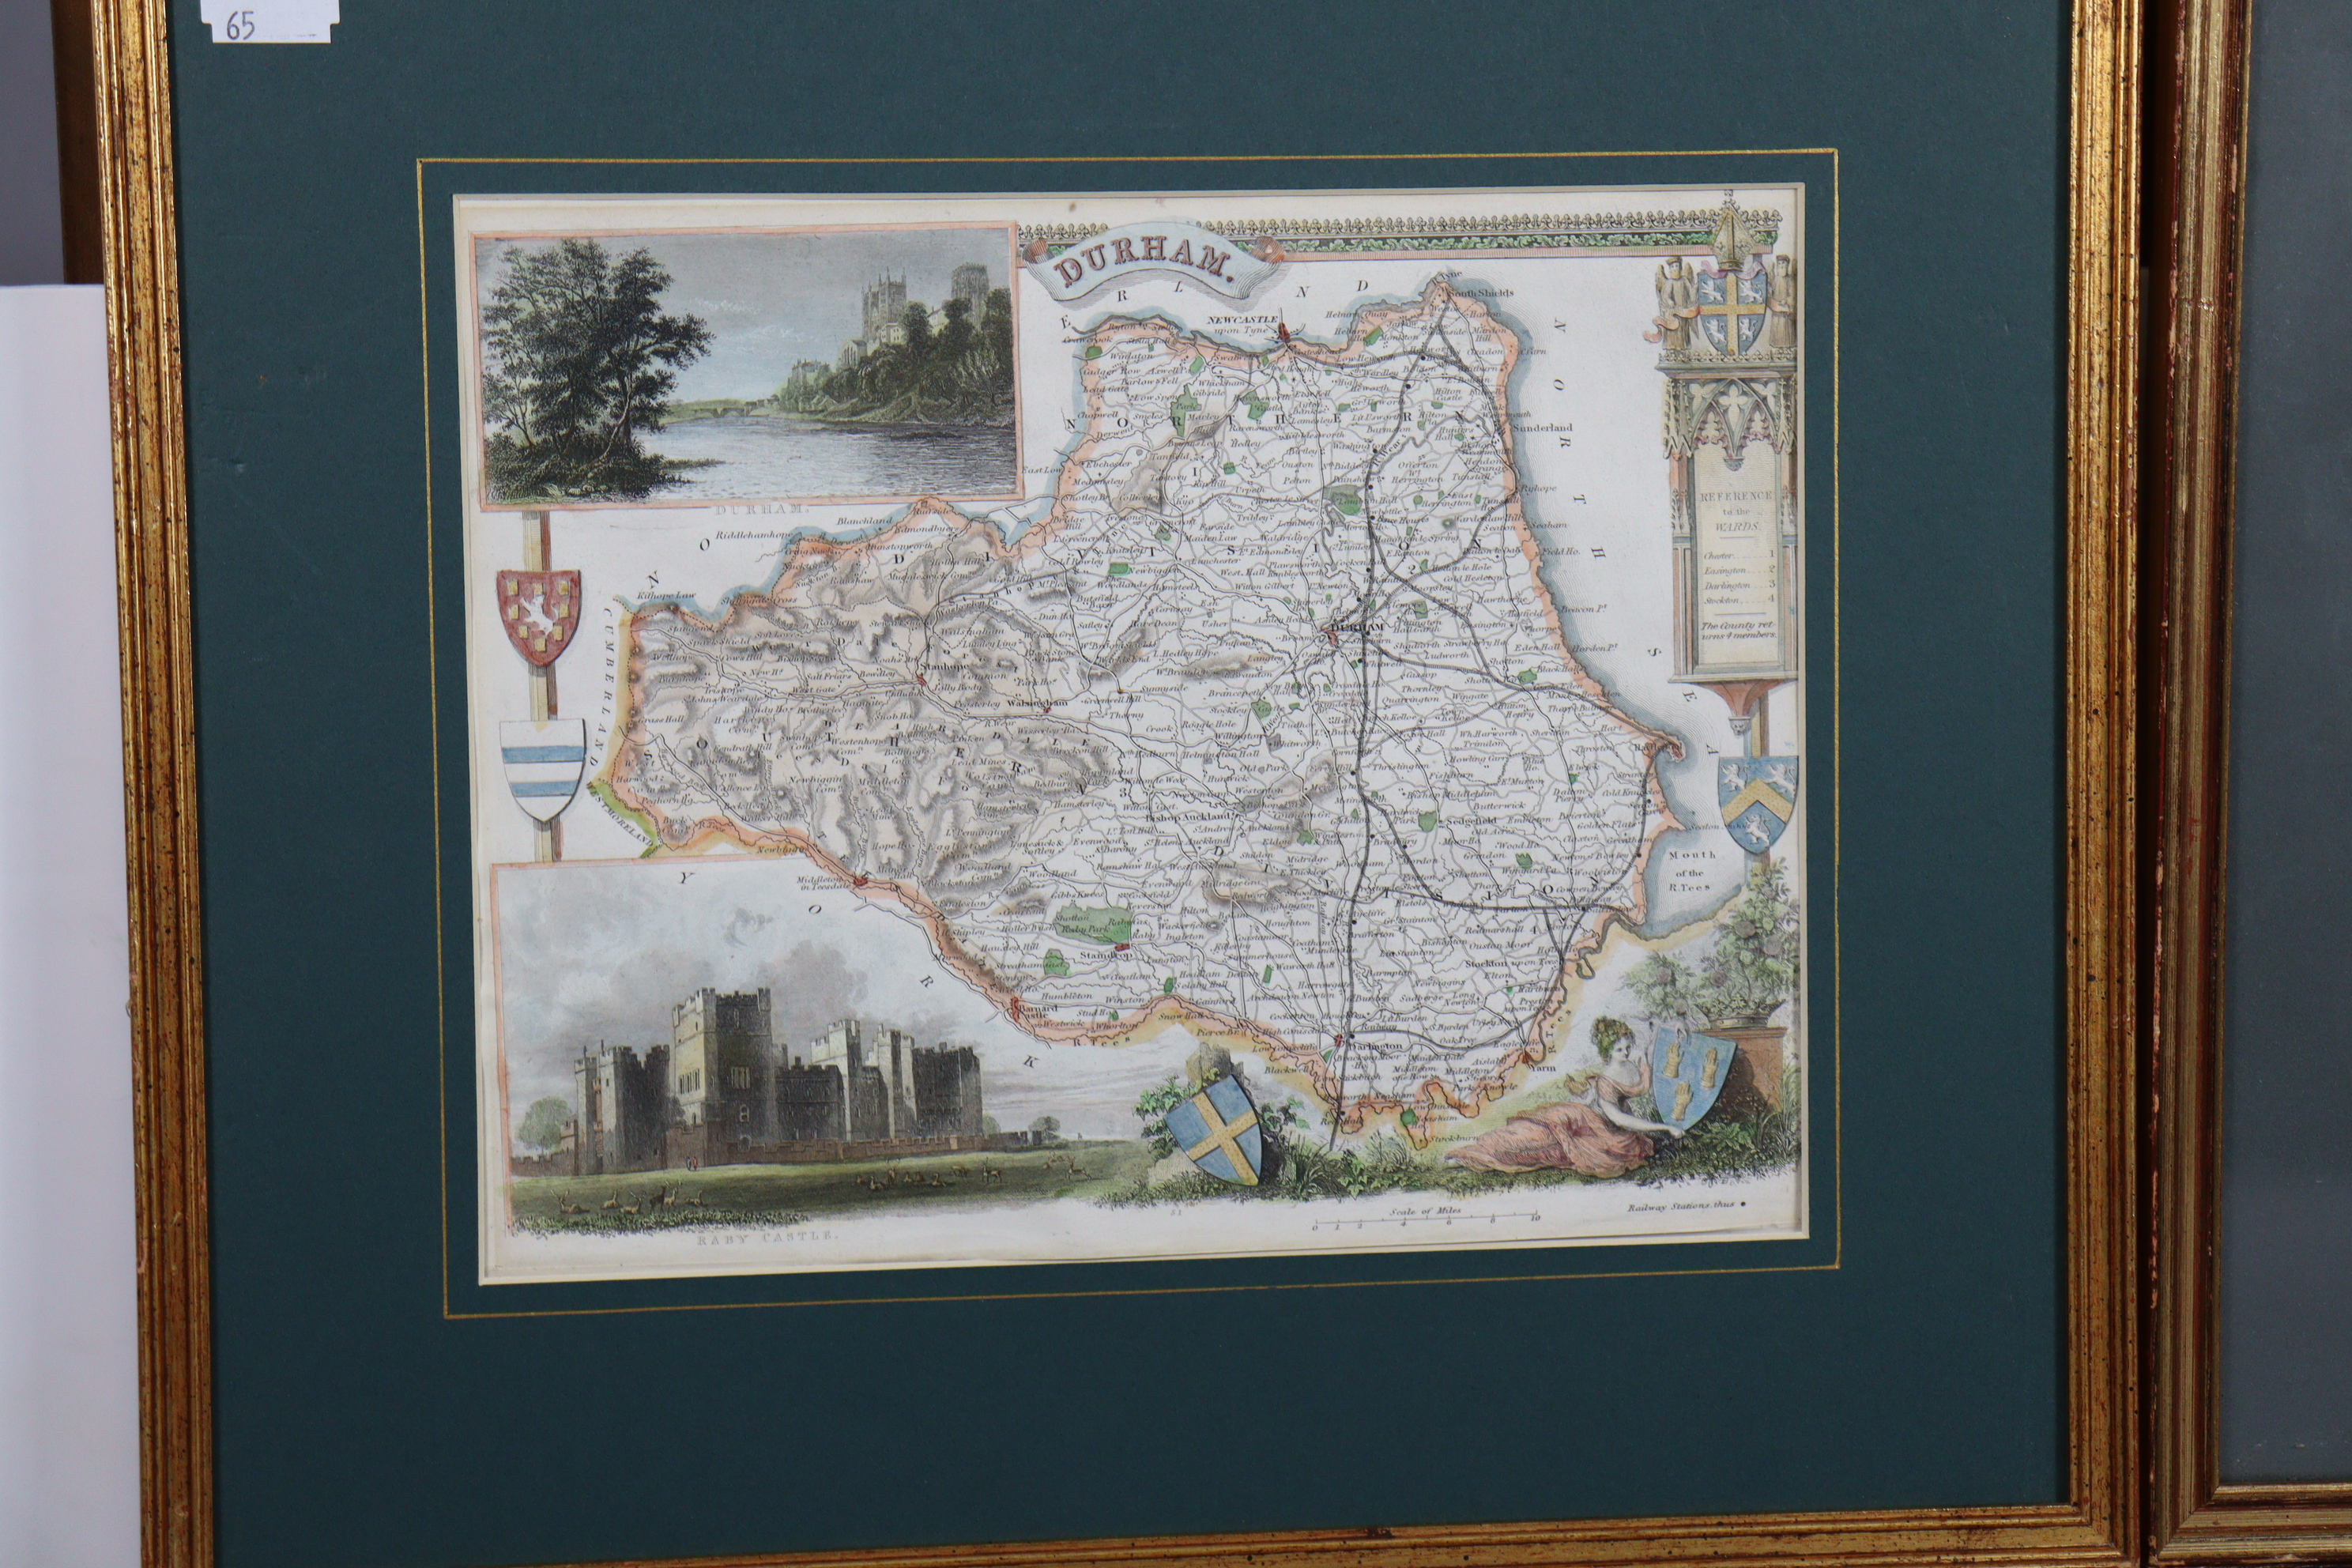 Four 19th century hand-coloured maps “Durham”, “Isle of Wight”, “Kent”, & “Surrey”, 8” x 10”, each - Image 2 of 5